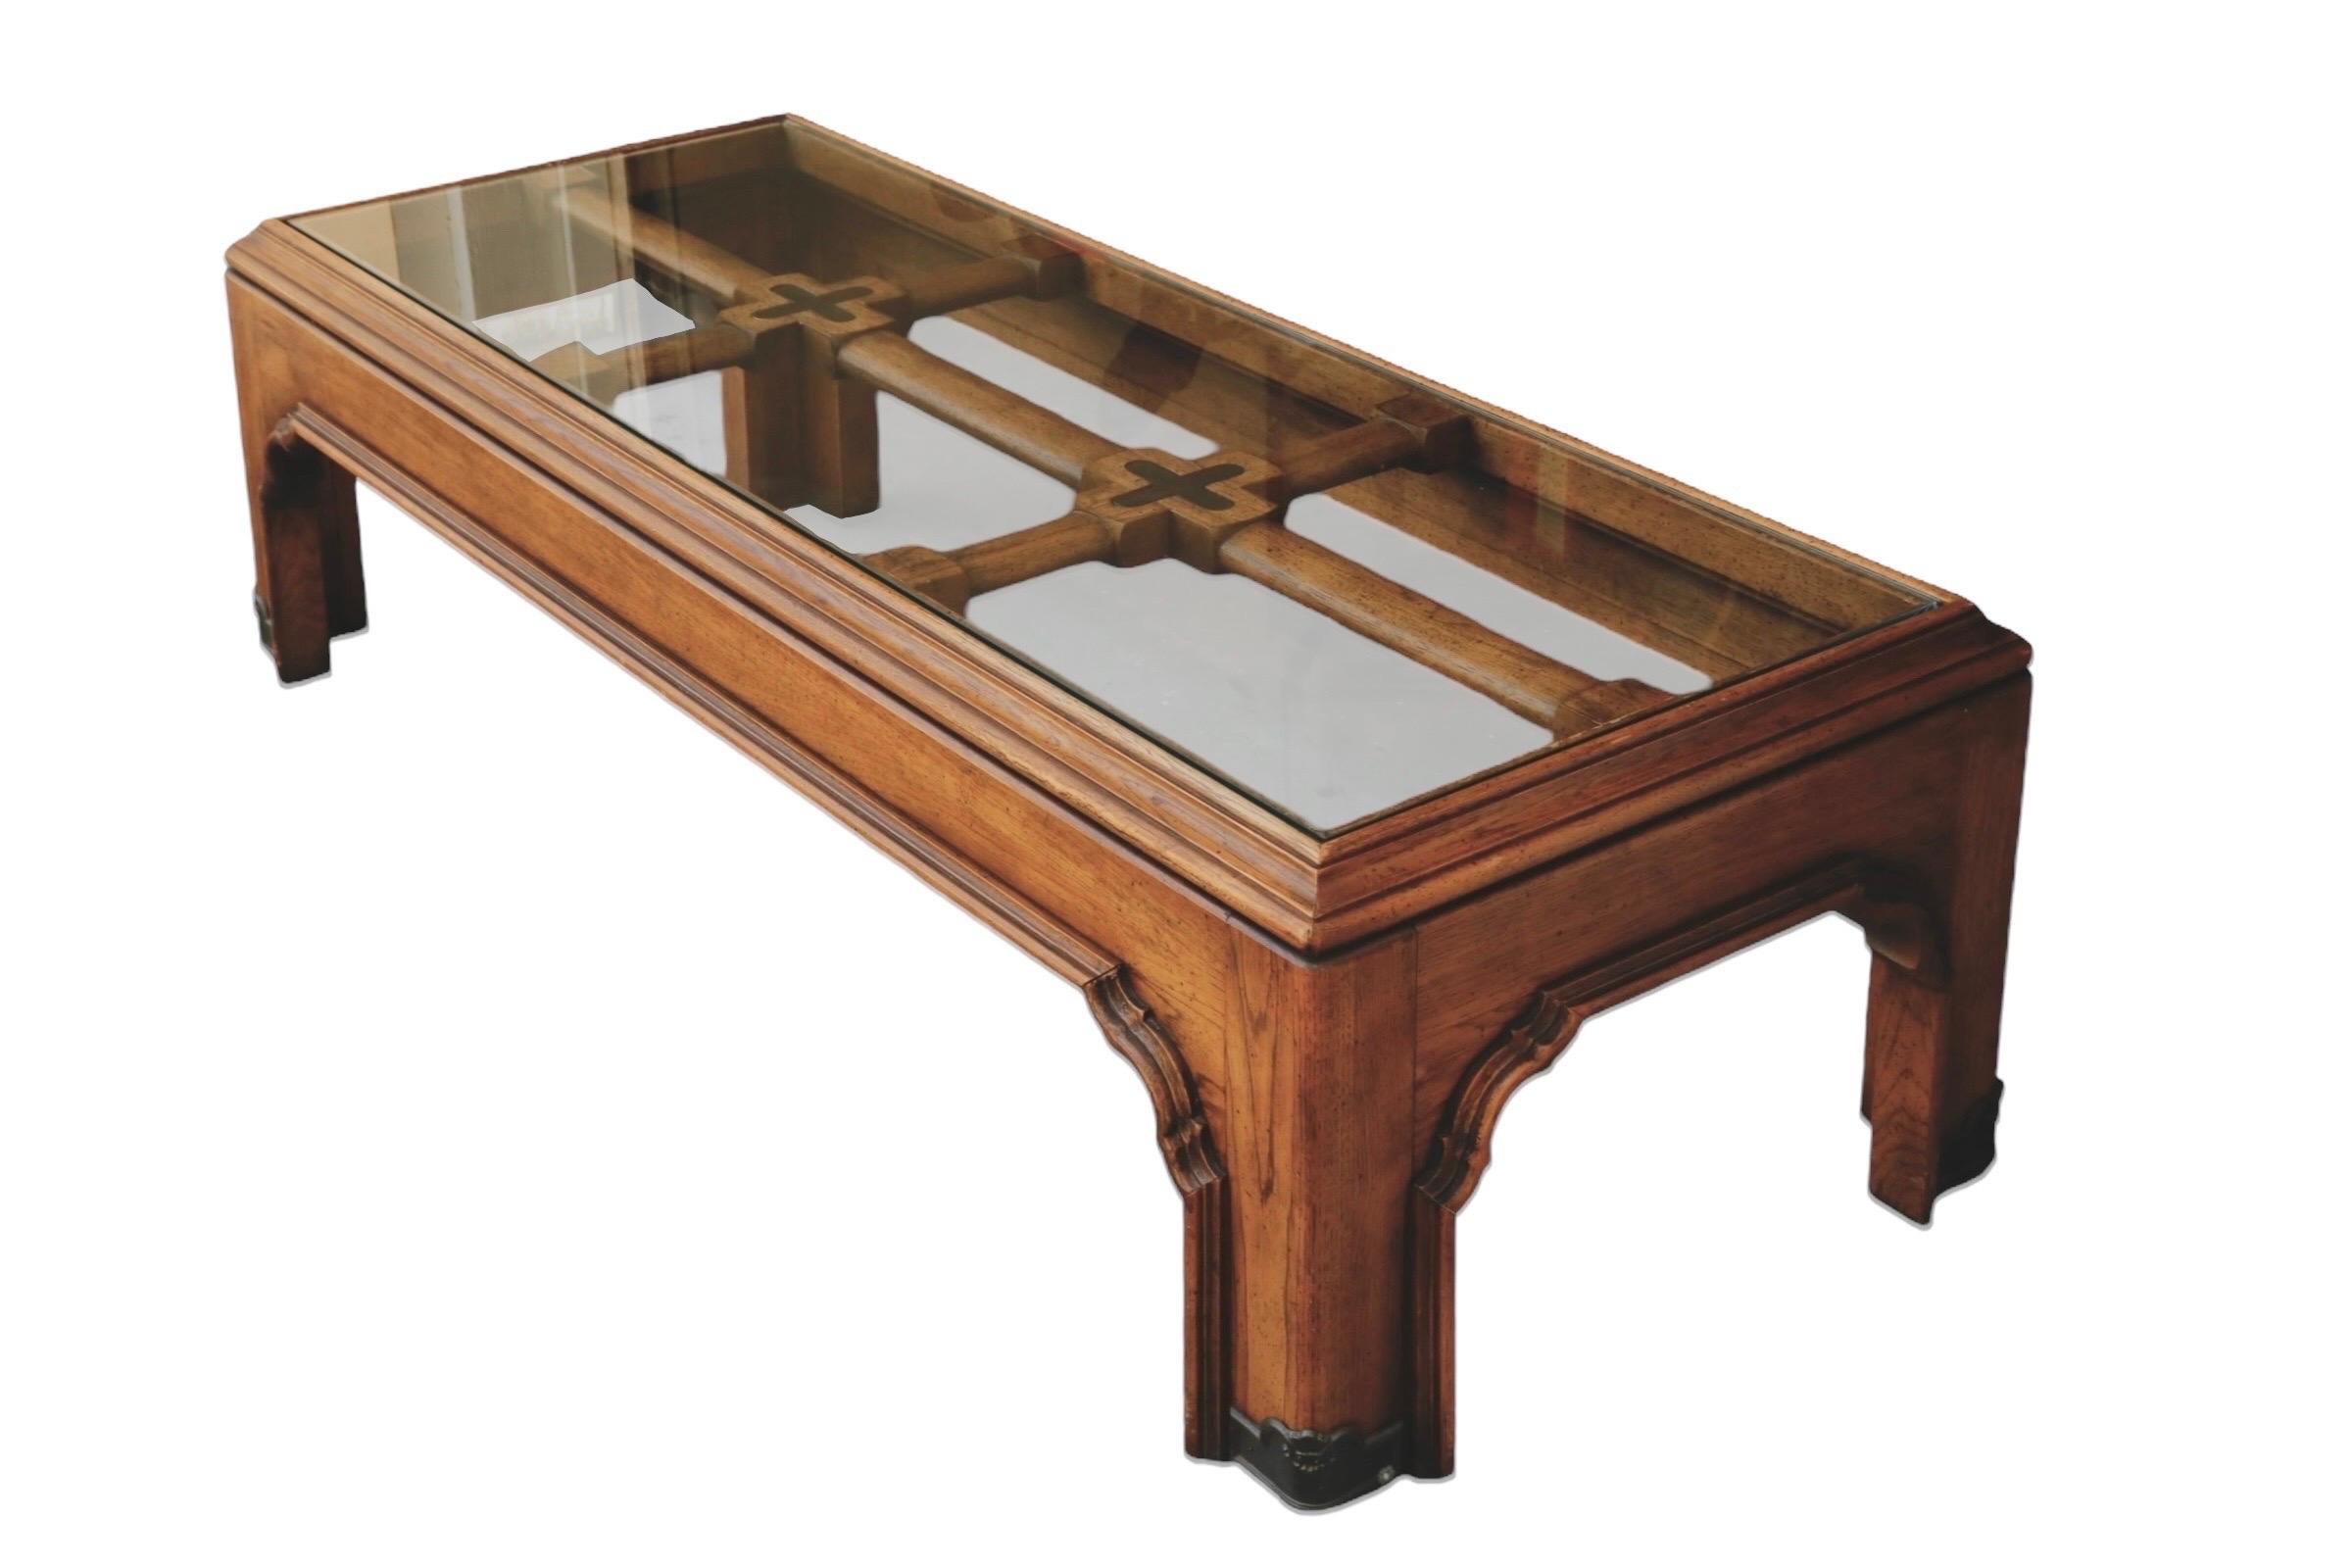 A glass top coffee table attributed to Drexel. The rectangular glass top is supported with a double stretcher inset with gold metal ‘x’s at the joins. The tabletop is framed with an angled beveled edge and the skirt and legs are finished with a